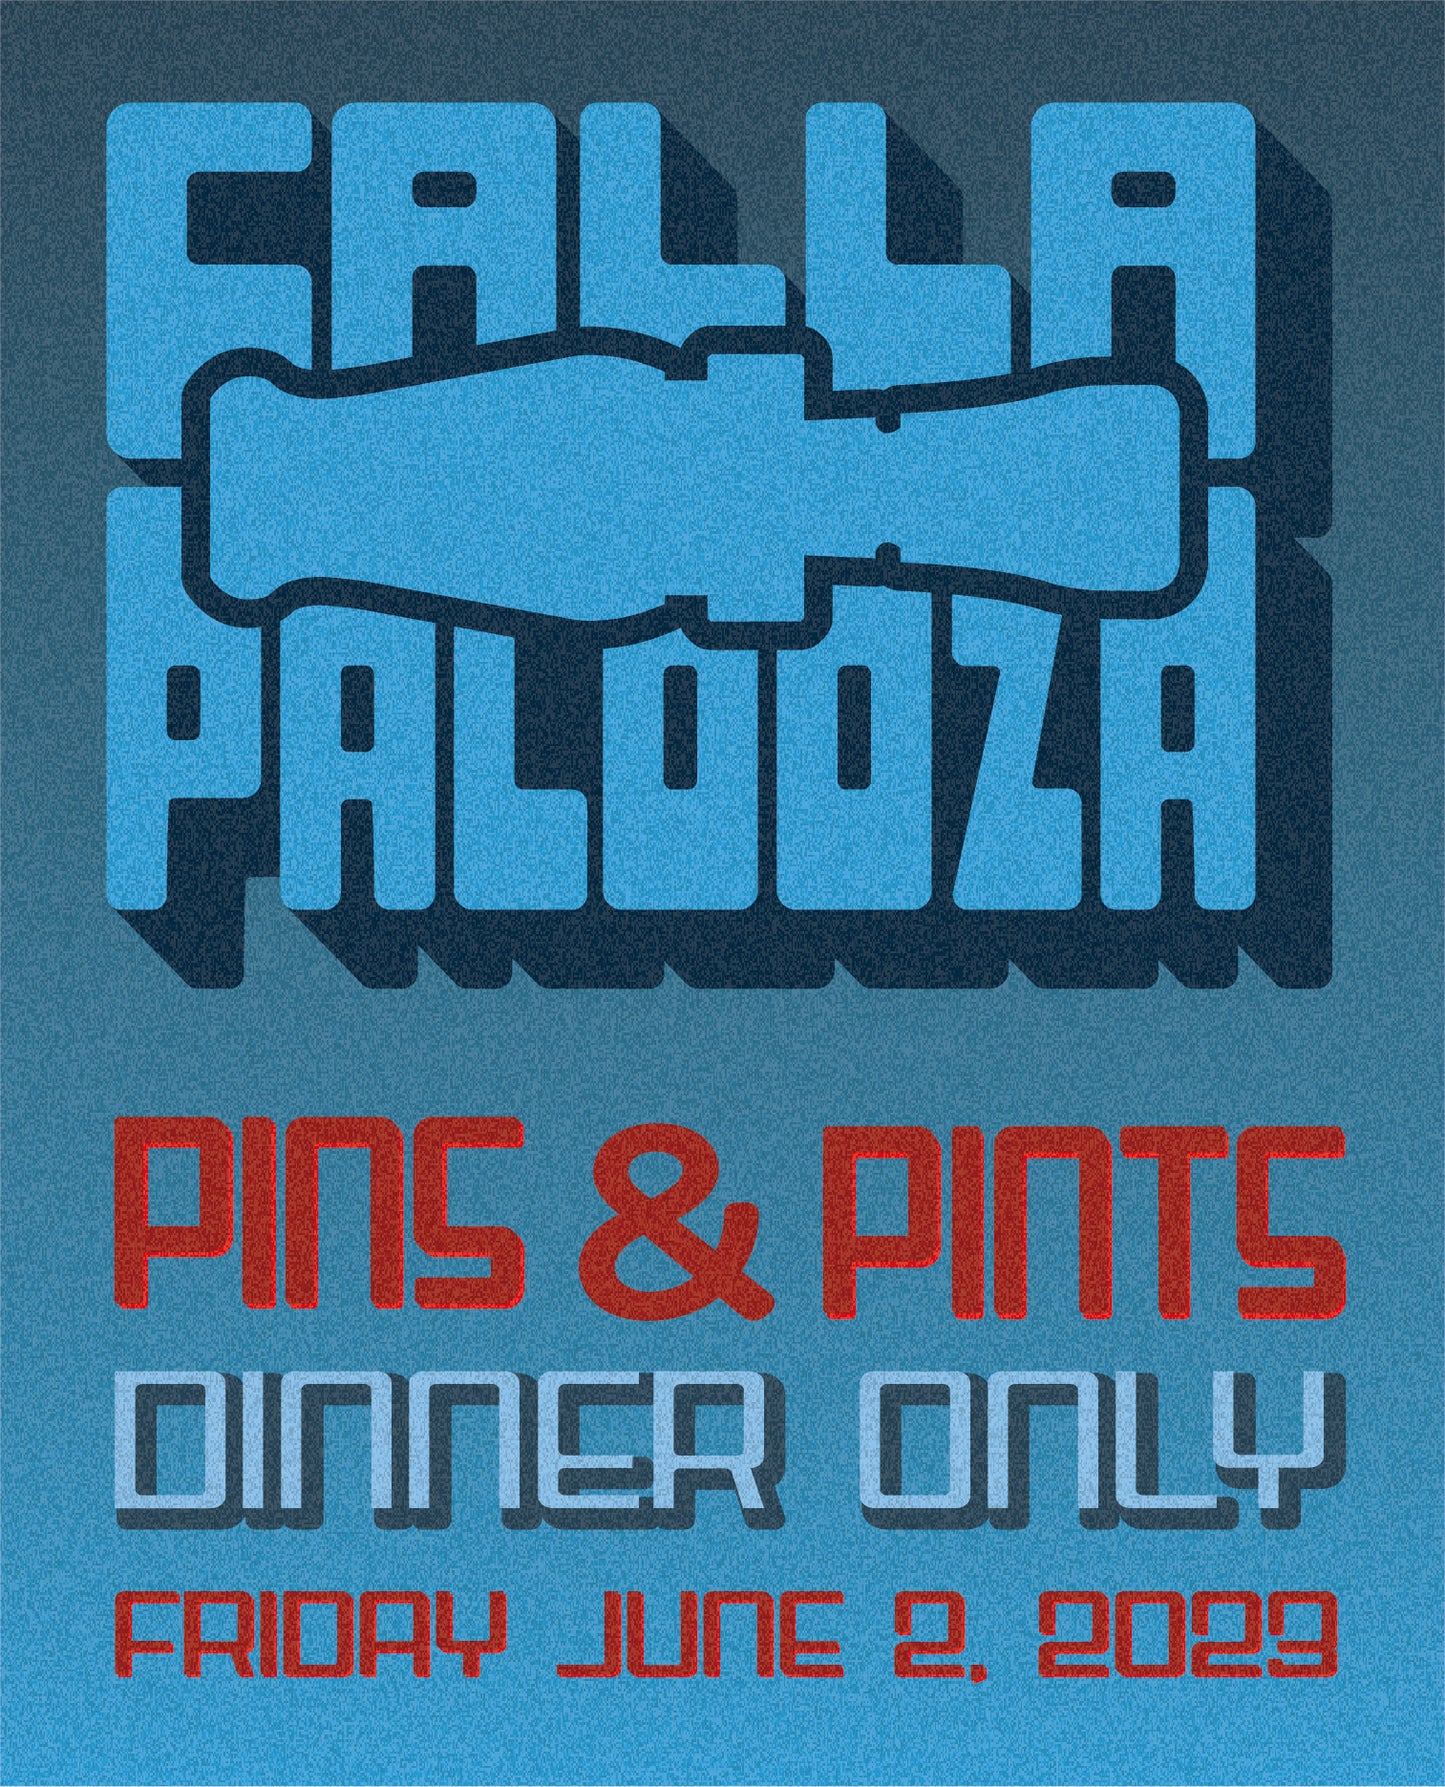 Pins & Pints DINNER ONLY - Friday, June 2, 5:30 - 9:30 pm